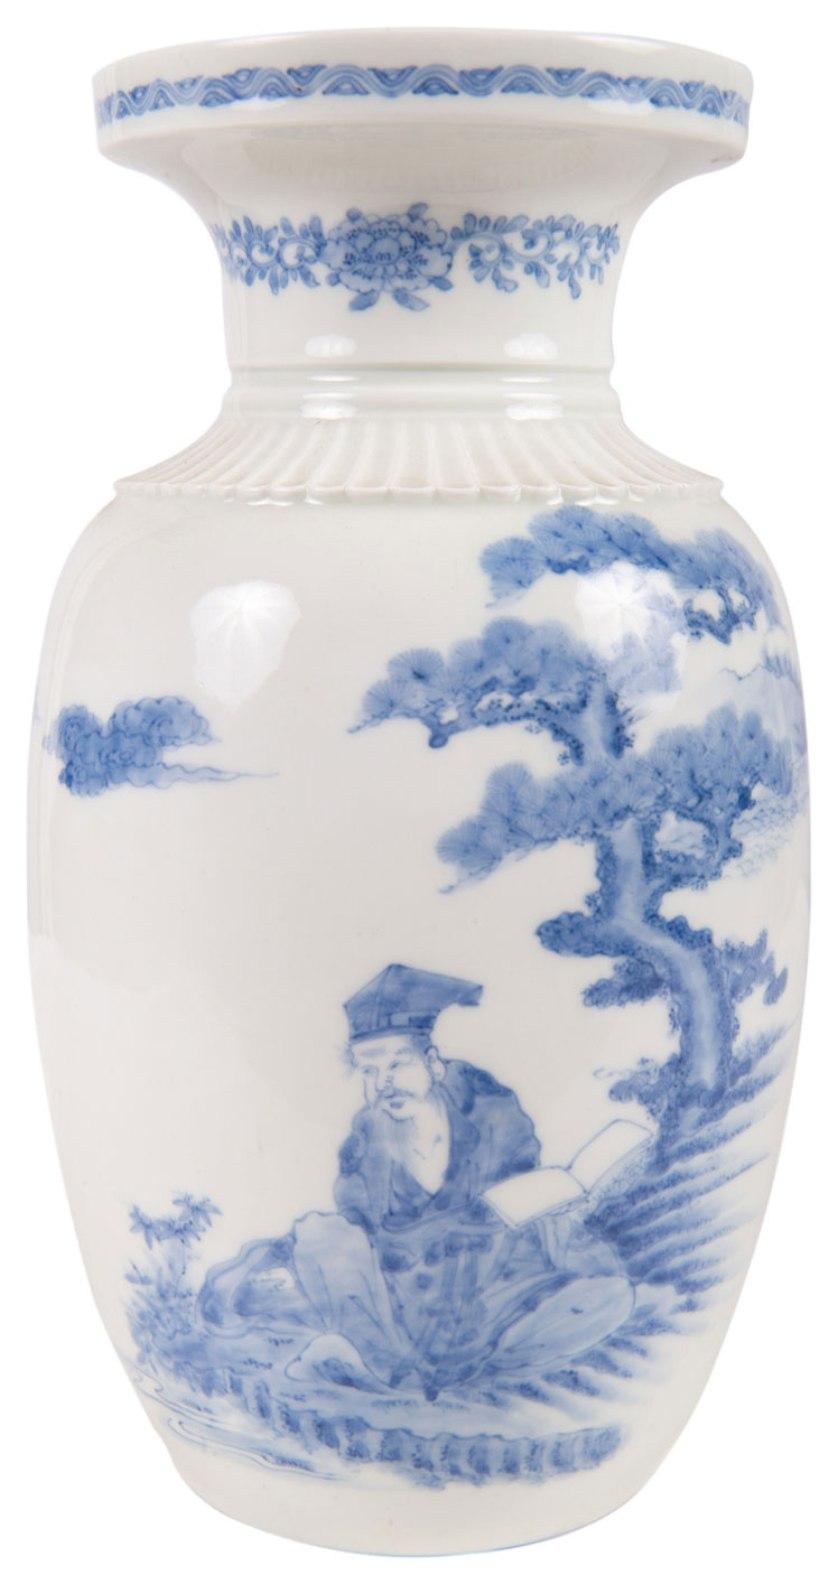 A beautiful late 19th century Meiji period (1868-1912) Hirado blue and white vase. Having classical motif and foliate decoration to the carved neck, with a hand painted scene of a seated scholar beneath and a blossom tree.